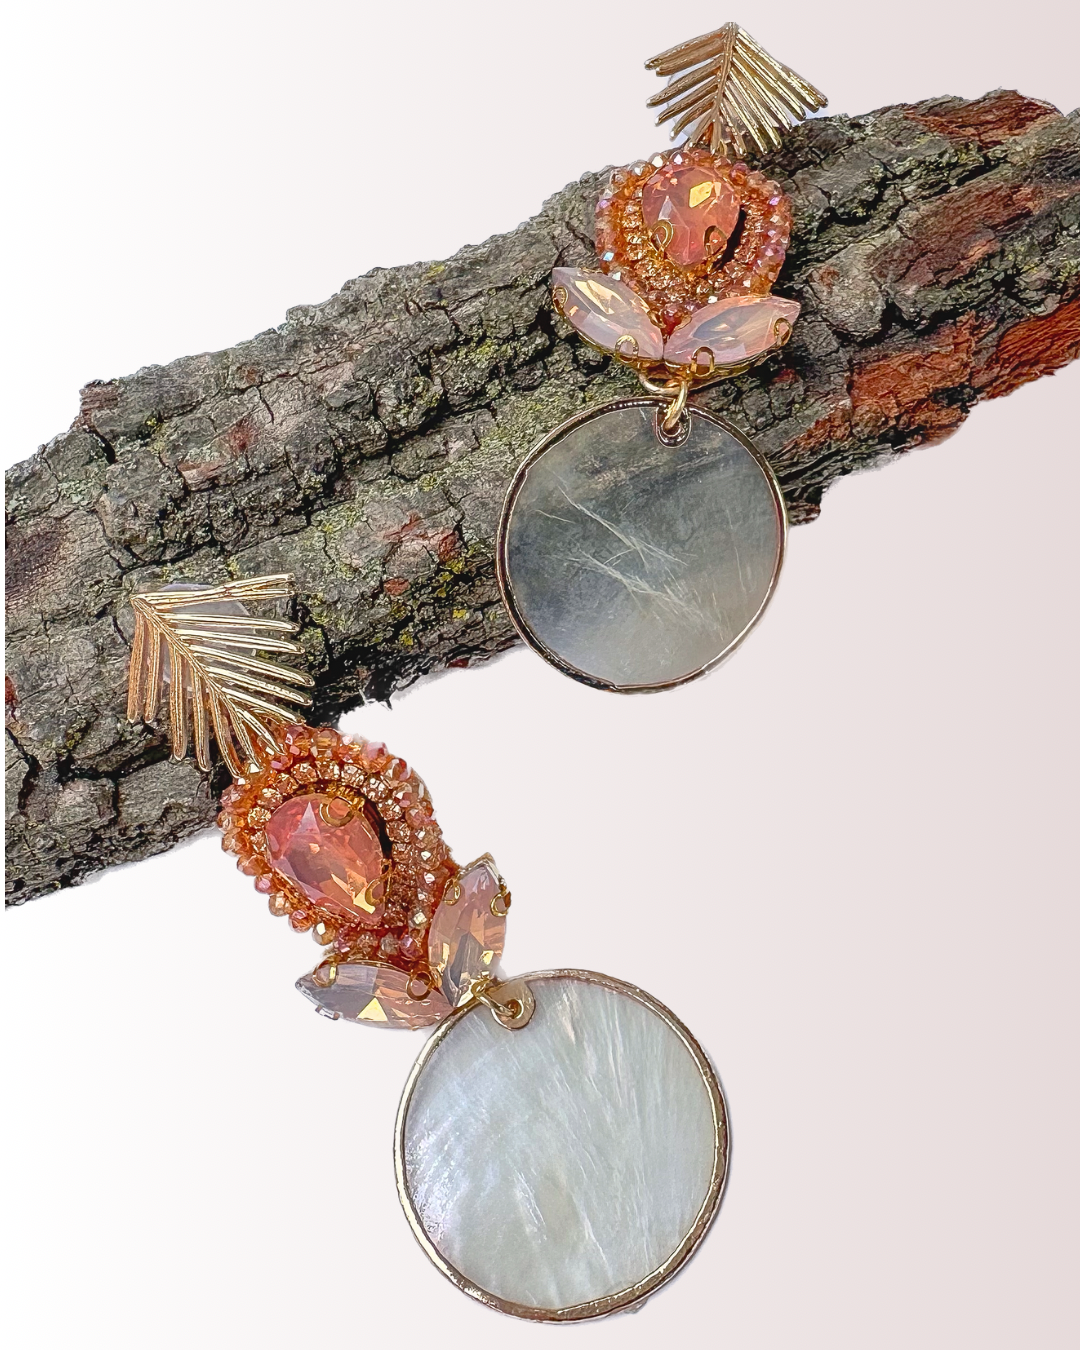 Large 'Sheet of Mother of Pearl' Earrings - Bohemian Style with Czech Crystals